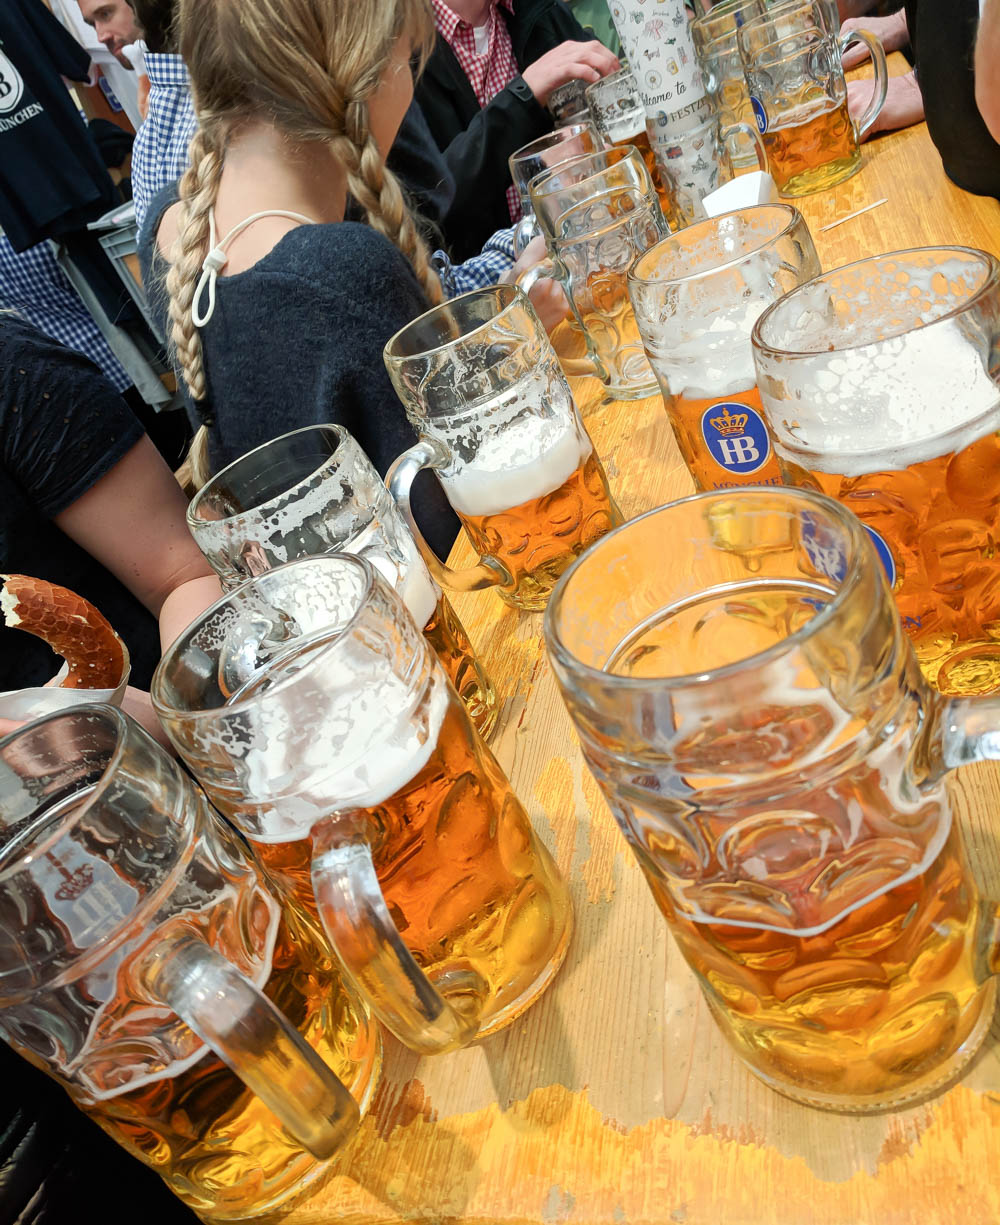 lots of beers | Find an Oktoberfest near me: The biggest and best Oktoberfests in all 50 states. Most popular Oktoberfest celebrations in each state.